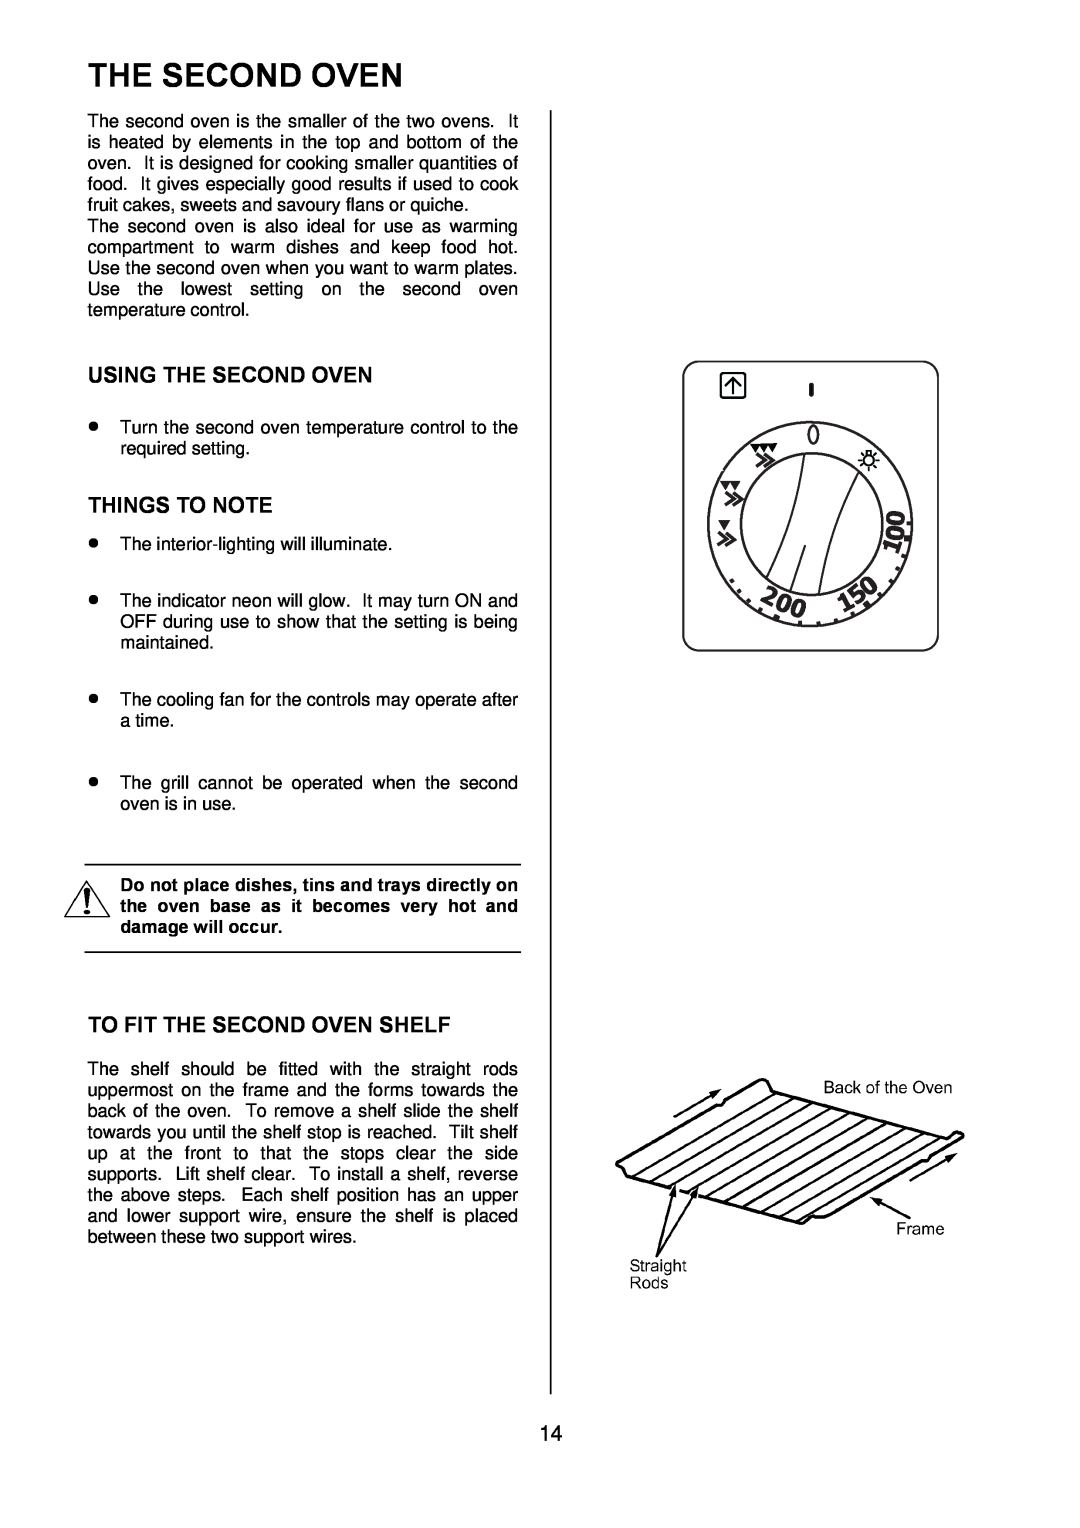 Electrolux D77000GF operating instructions Using The Second Oven, To Fit The Second Oven Shelf, Things To Note 